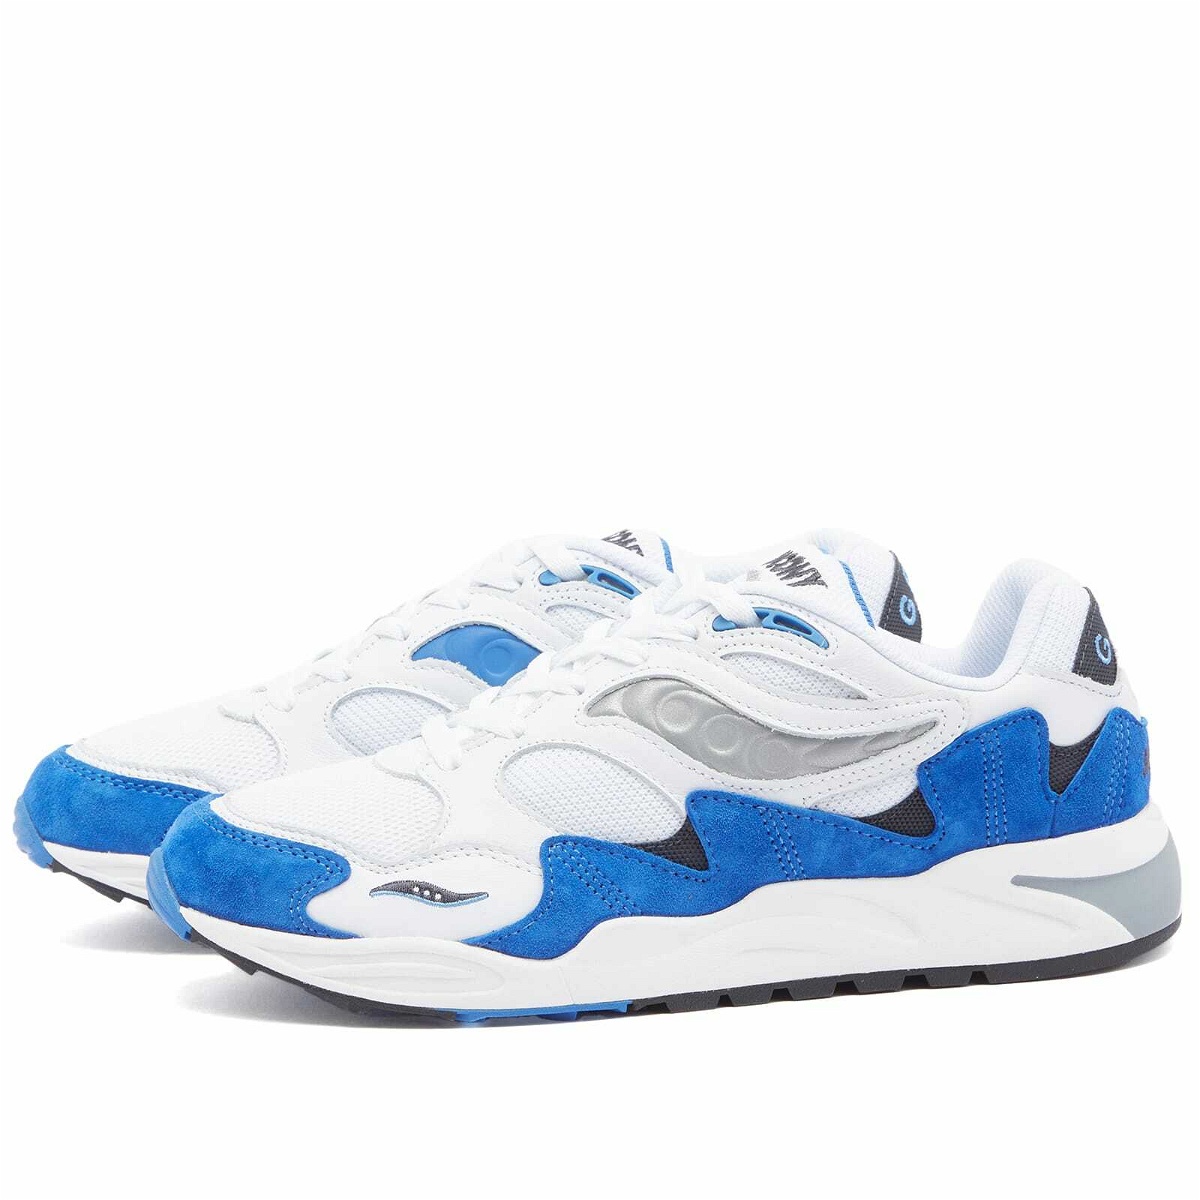 Saucony Men's Grid Shadow 2 Sneakers in White/Blue Saucony